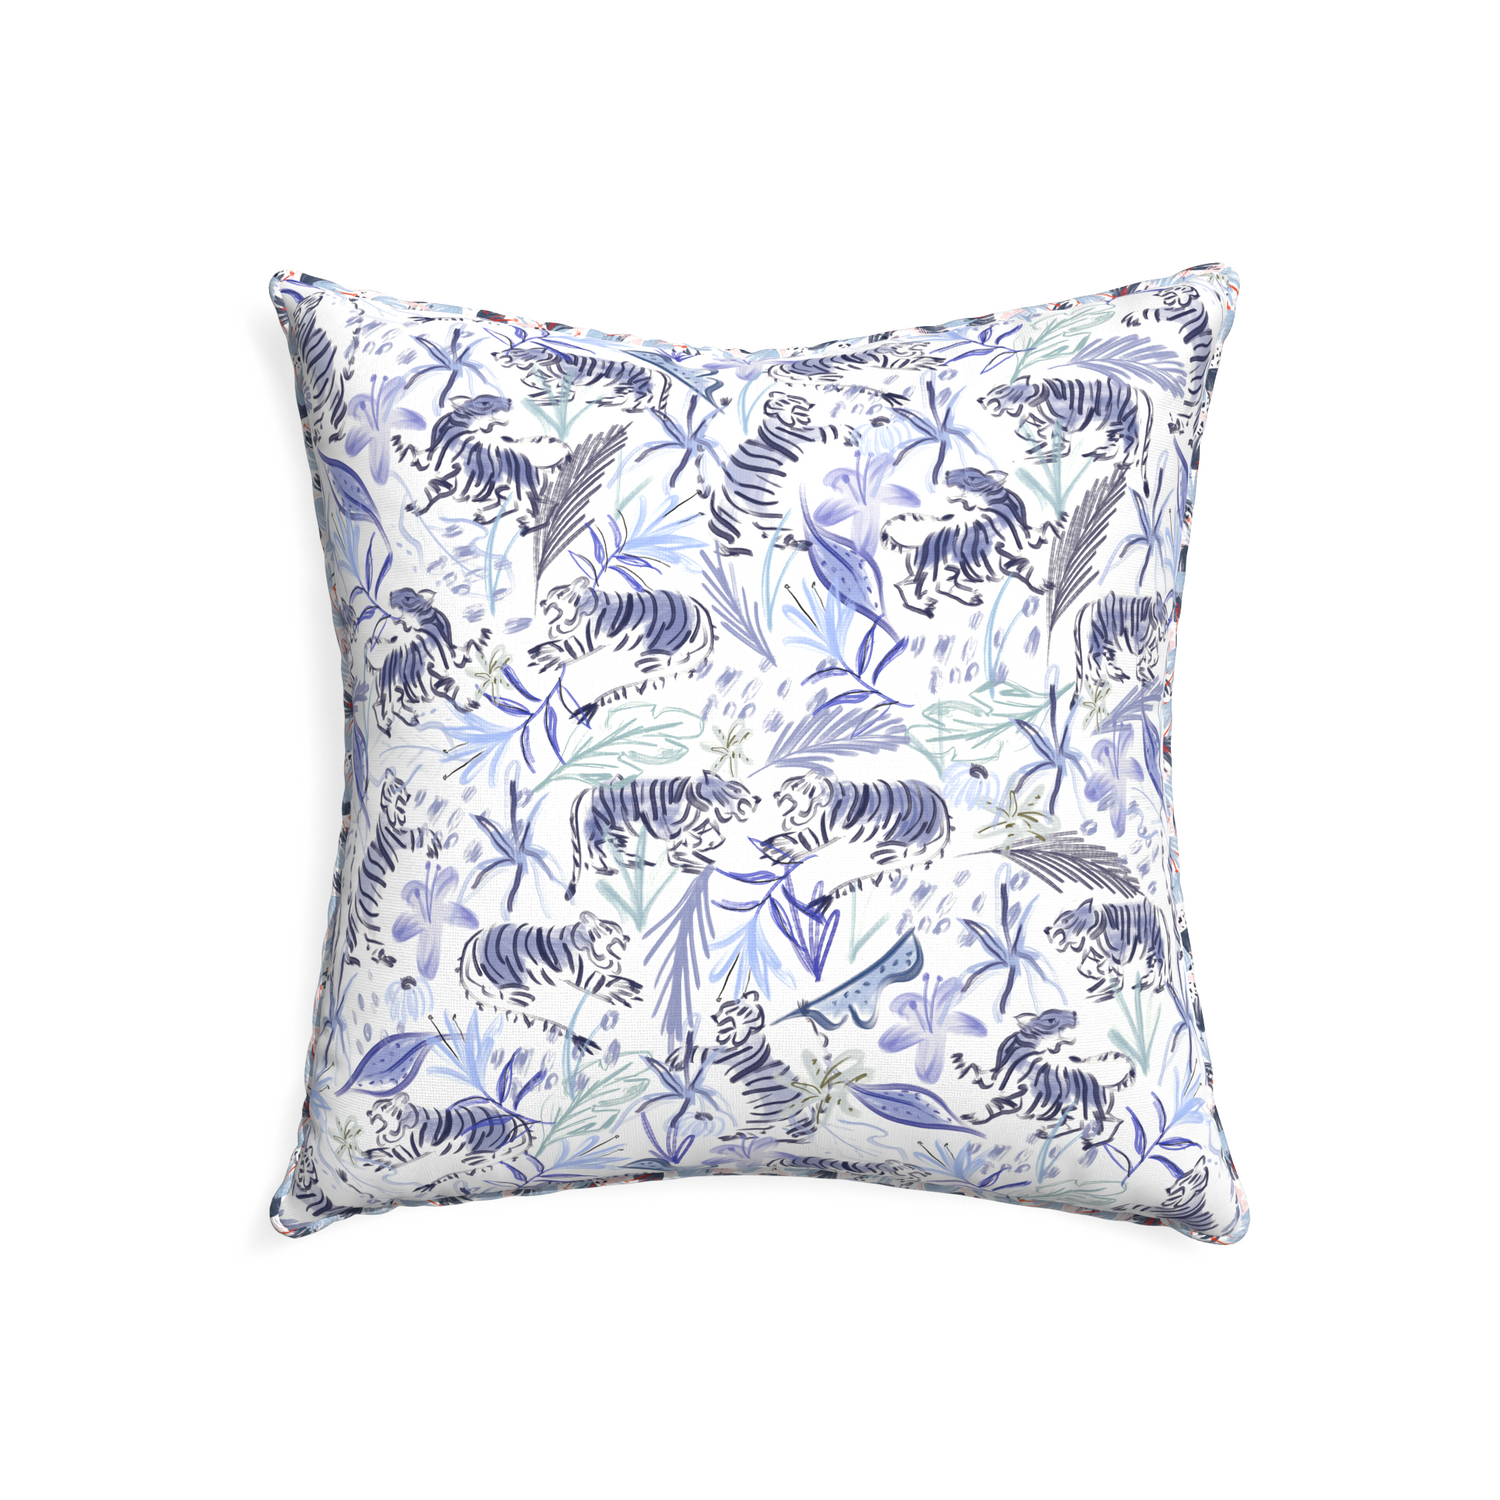 22-square frida blue custom blue with intricate tiger designpillow with e piping on white background